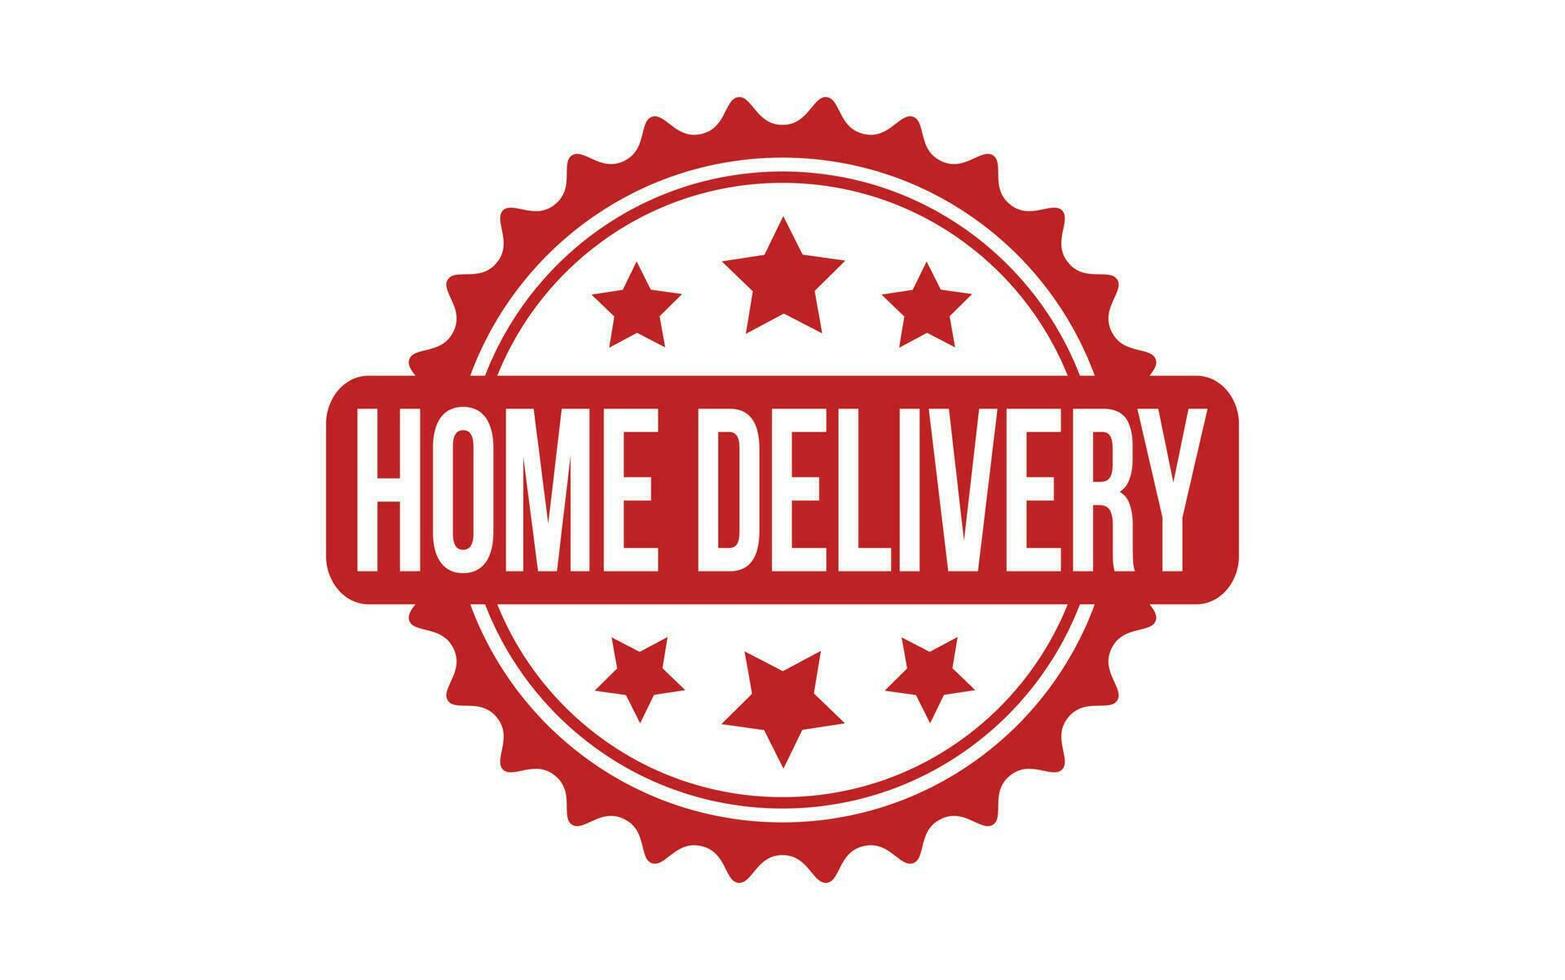 Home Delivery rubber grunge stamp seal vector